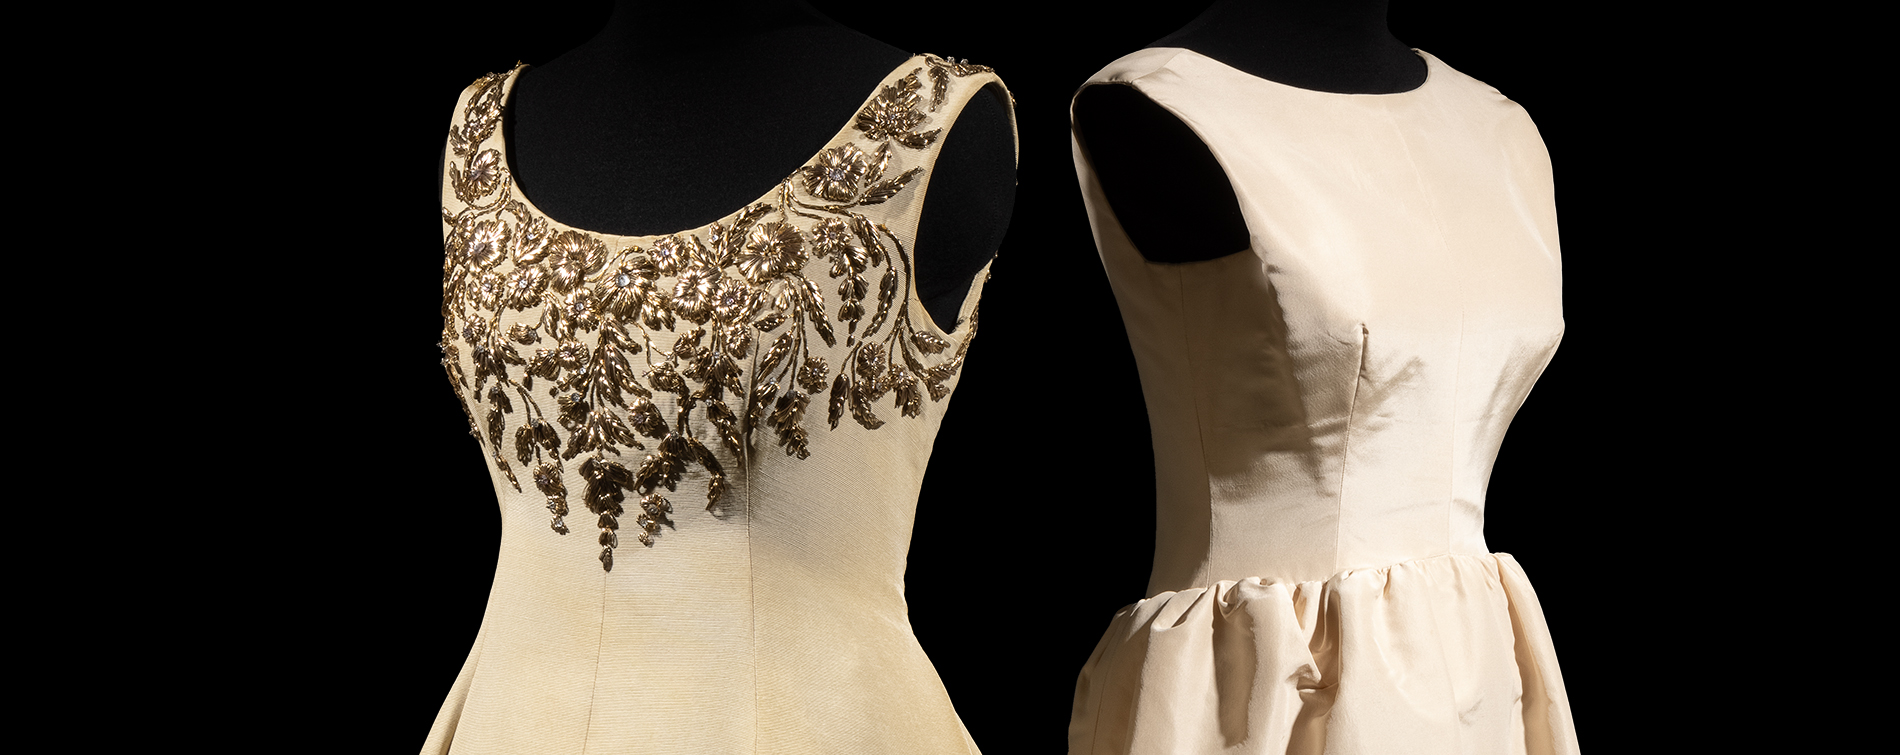 bodice view of two cream colored evening dresses by dior and balenciaga